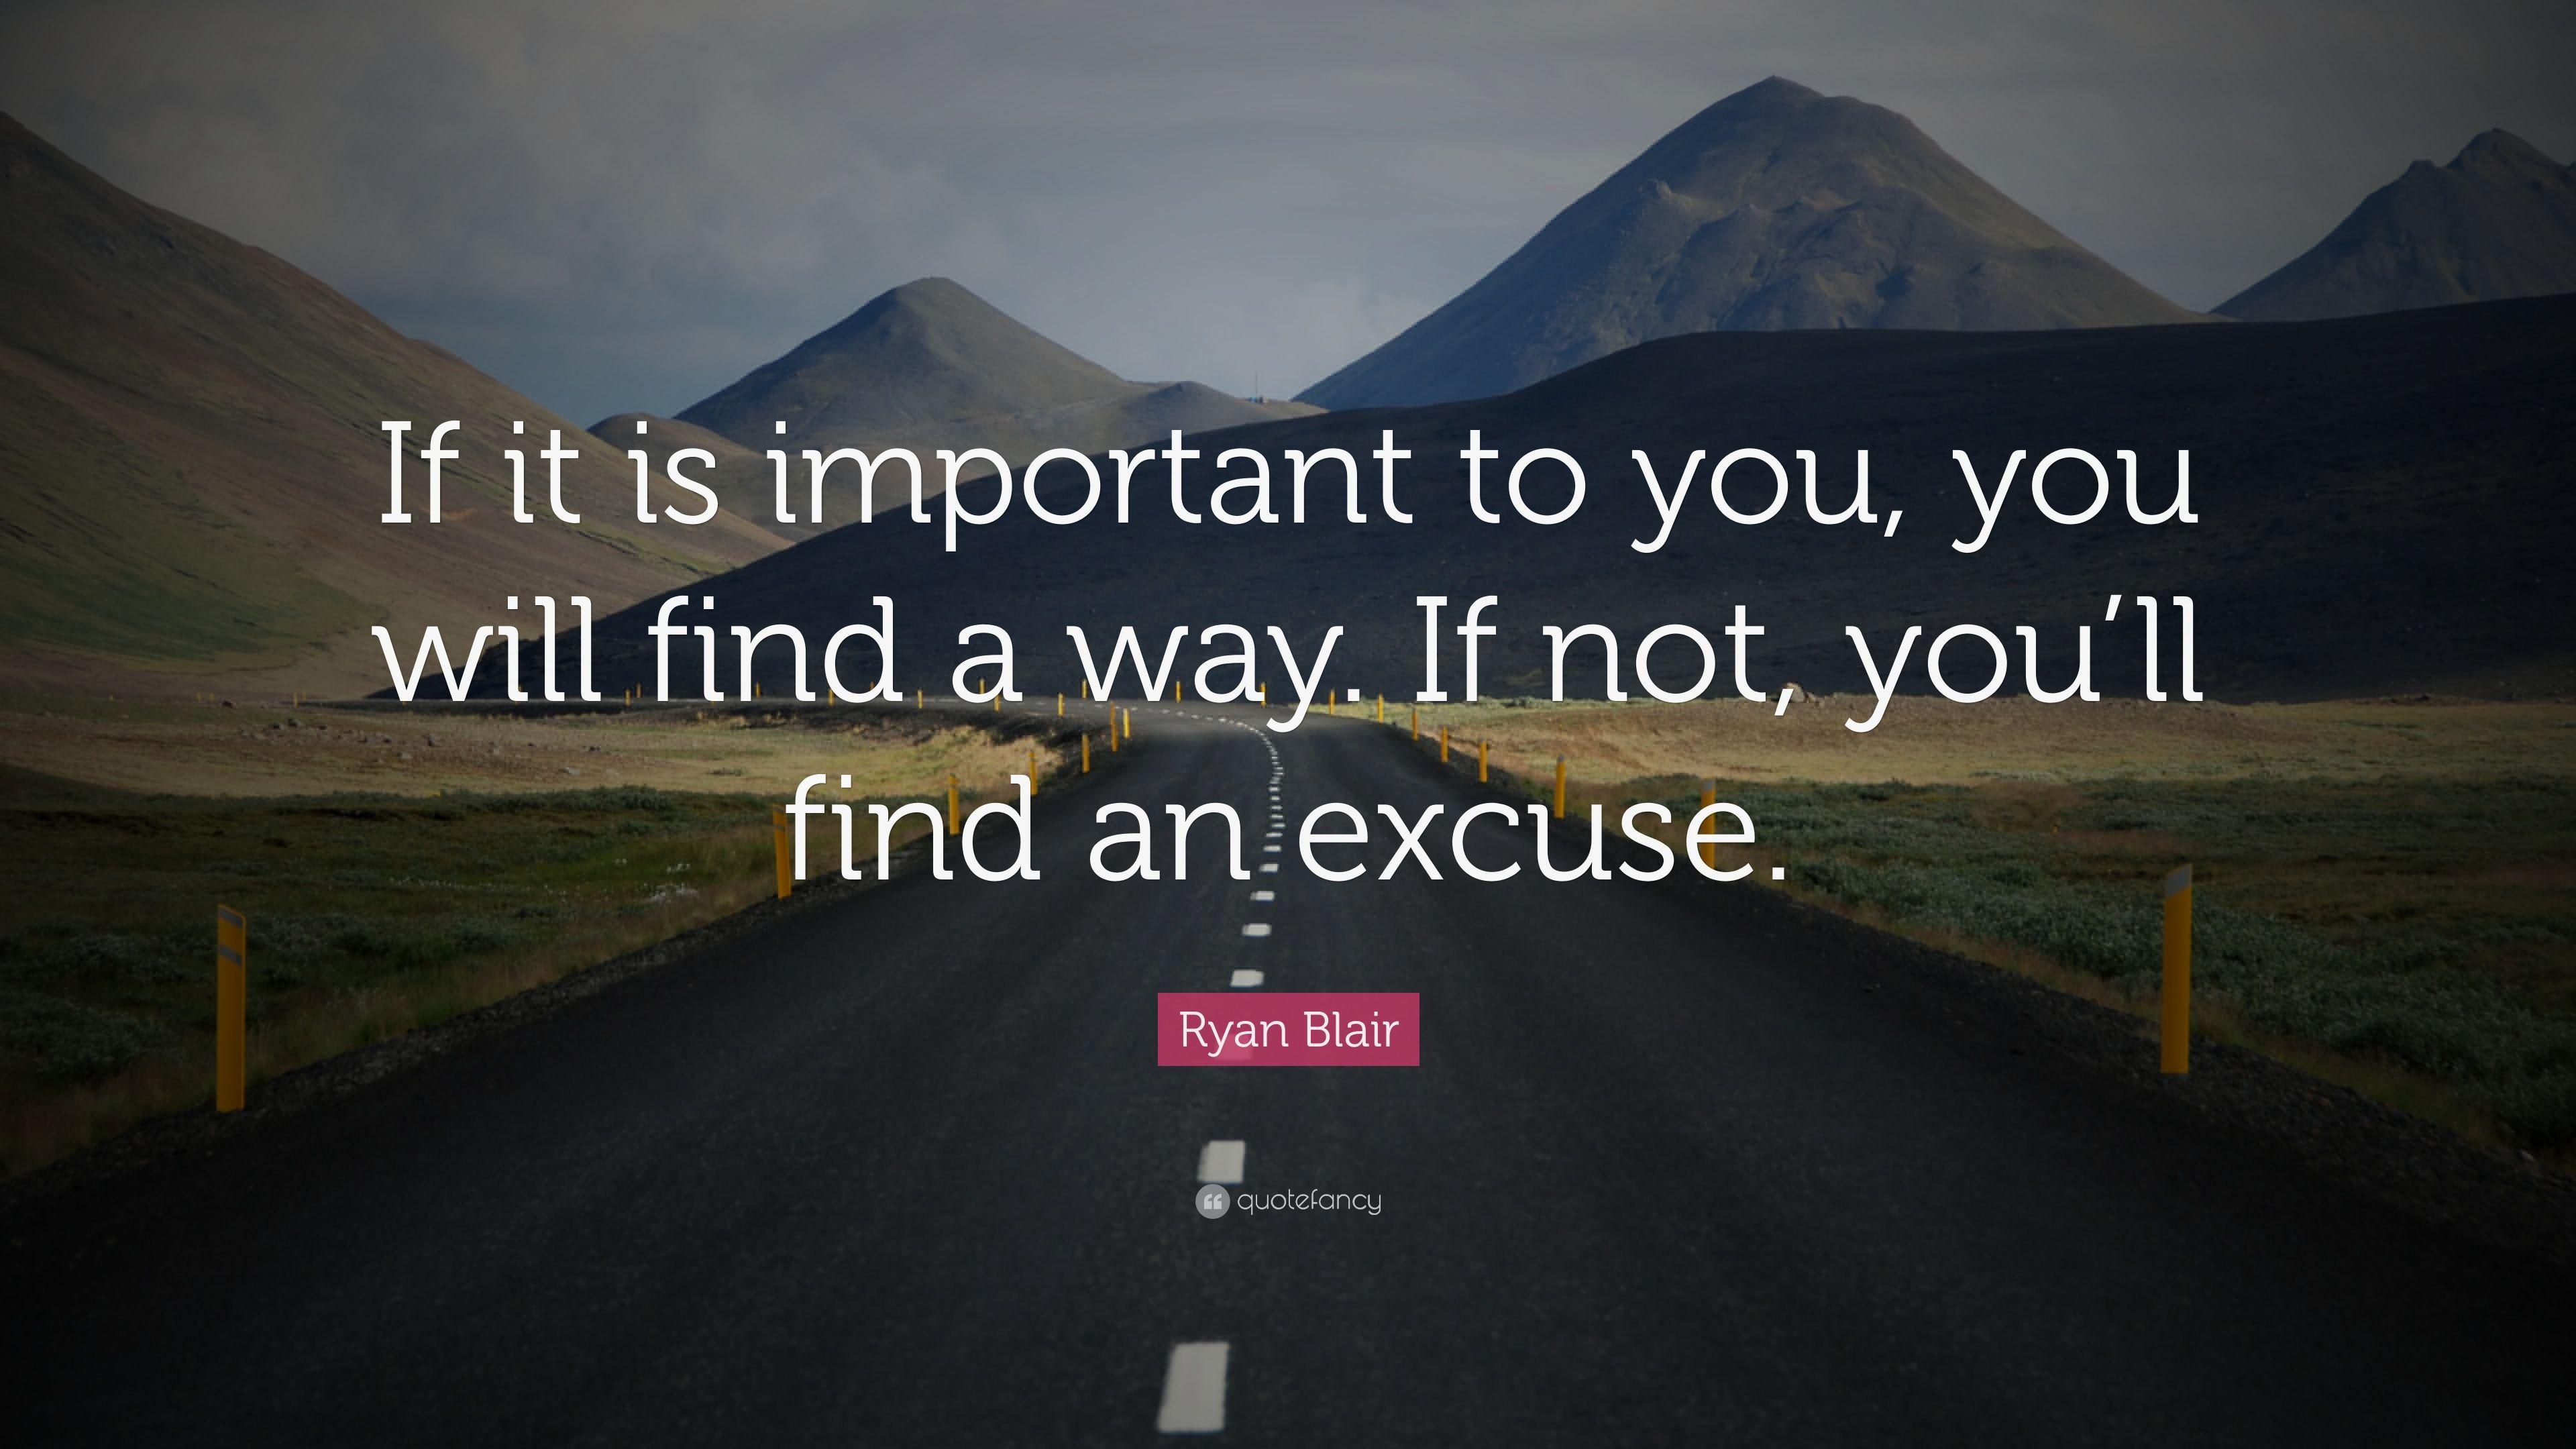 Ryan Blair Quote: "If it is important to you, you will find a way.